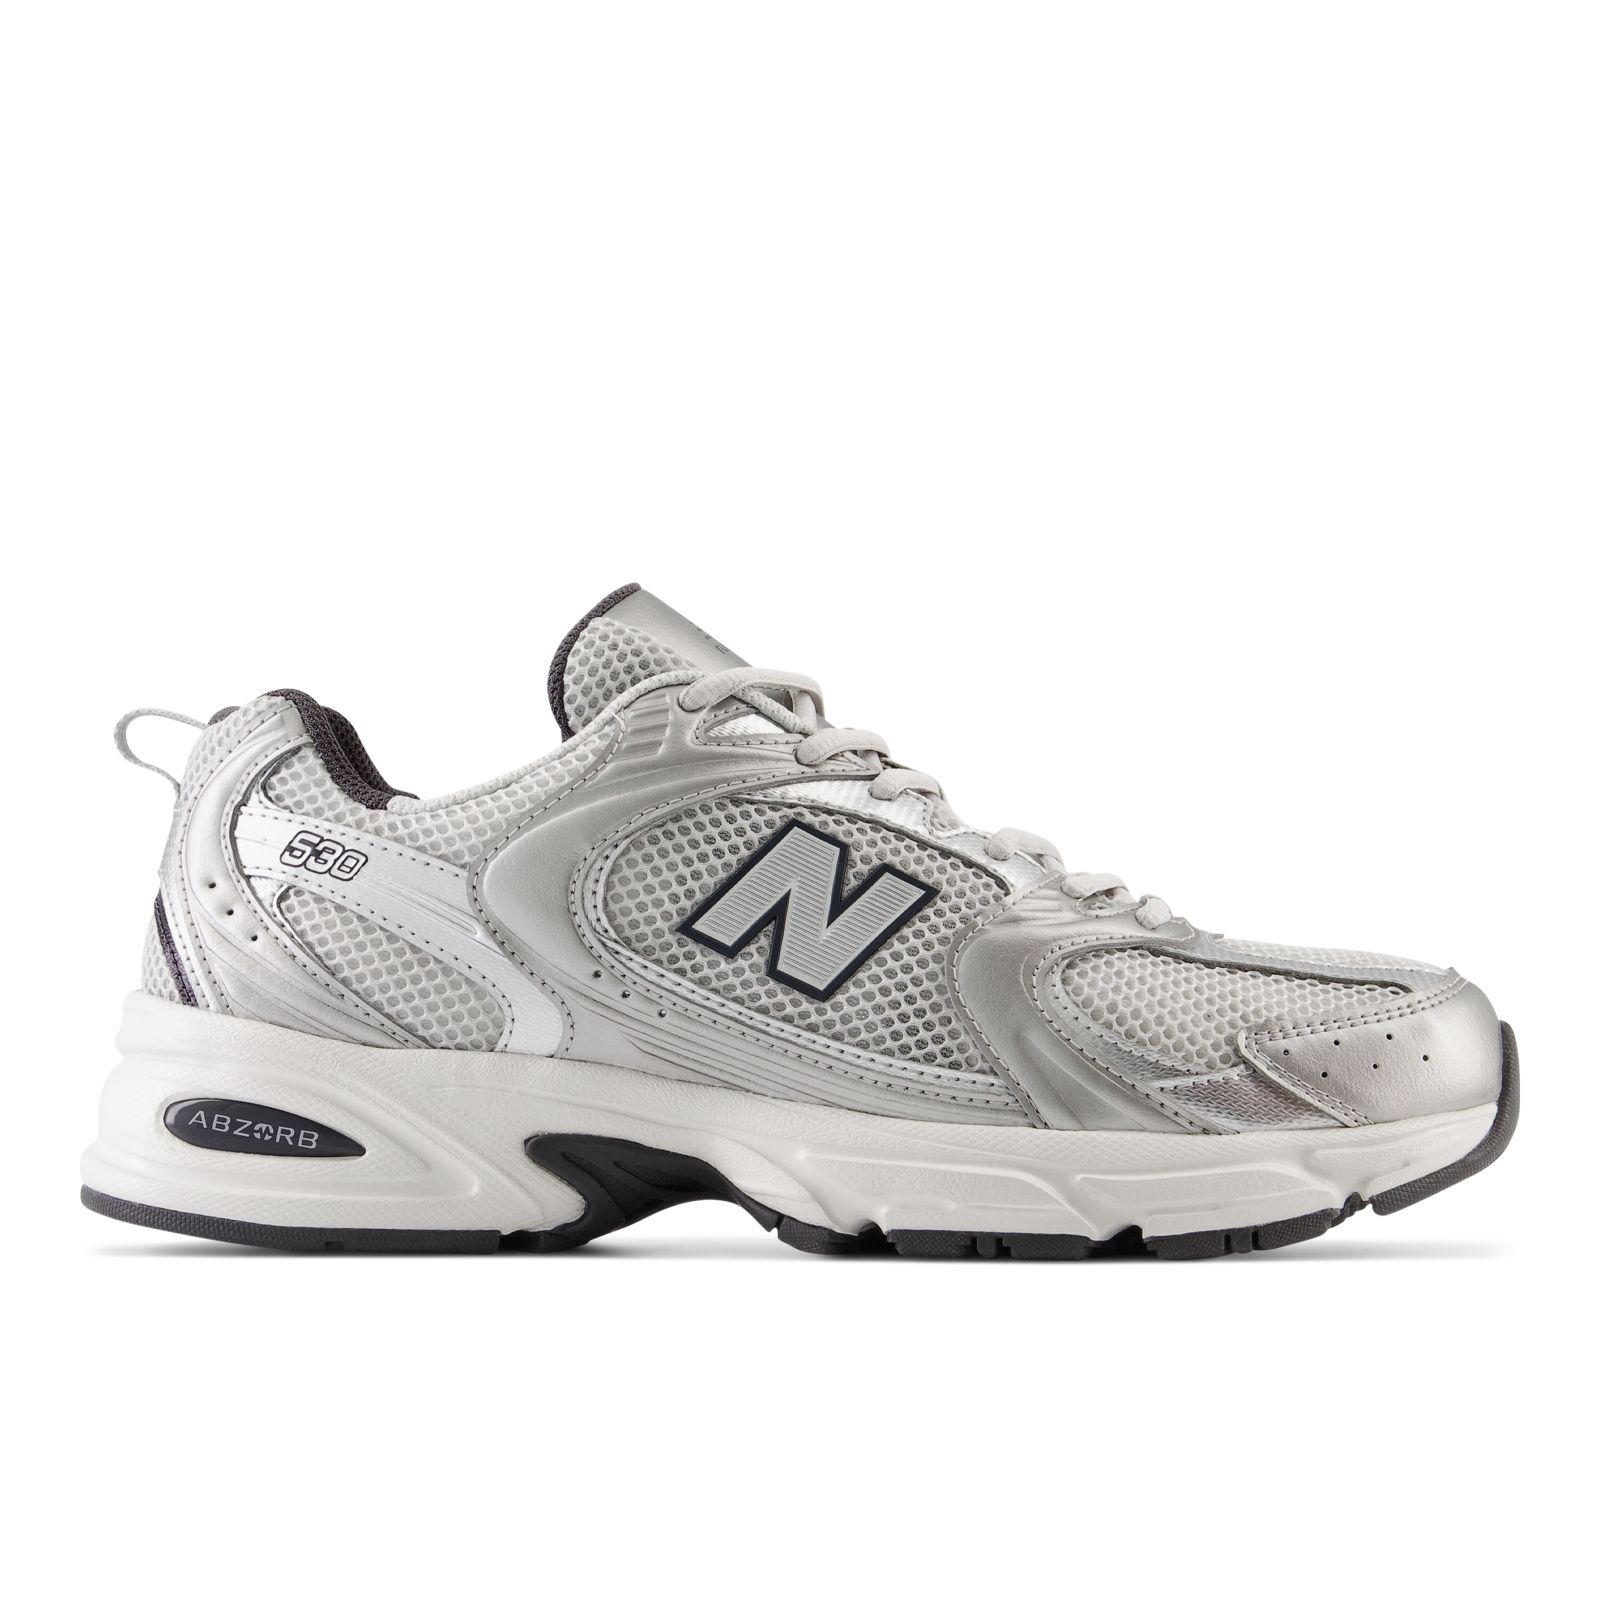 New Balance 550 White Green Men's, Afterpay It Now, 100% Authentic